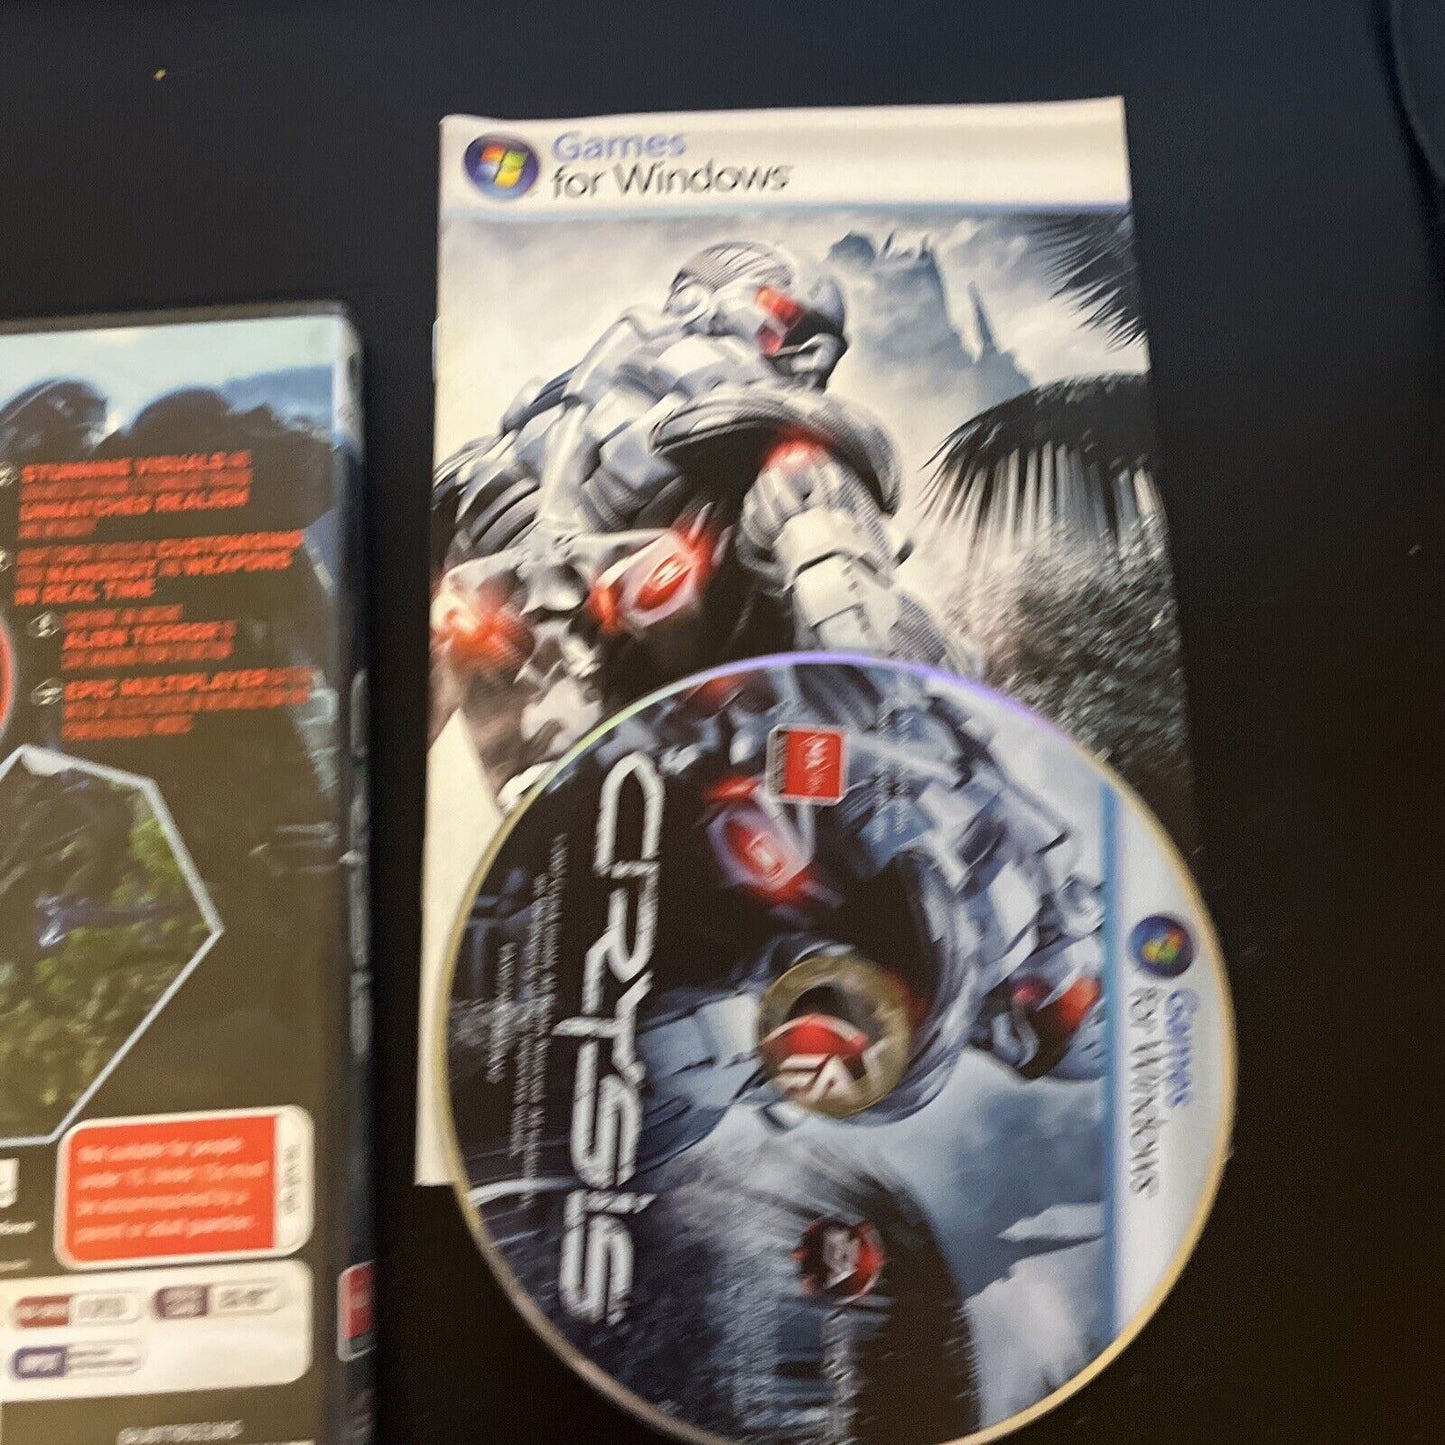 Crysis - PC DVD-ROM Game 2007 - Games For Windows